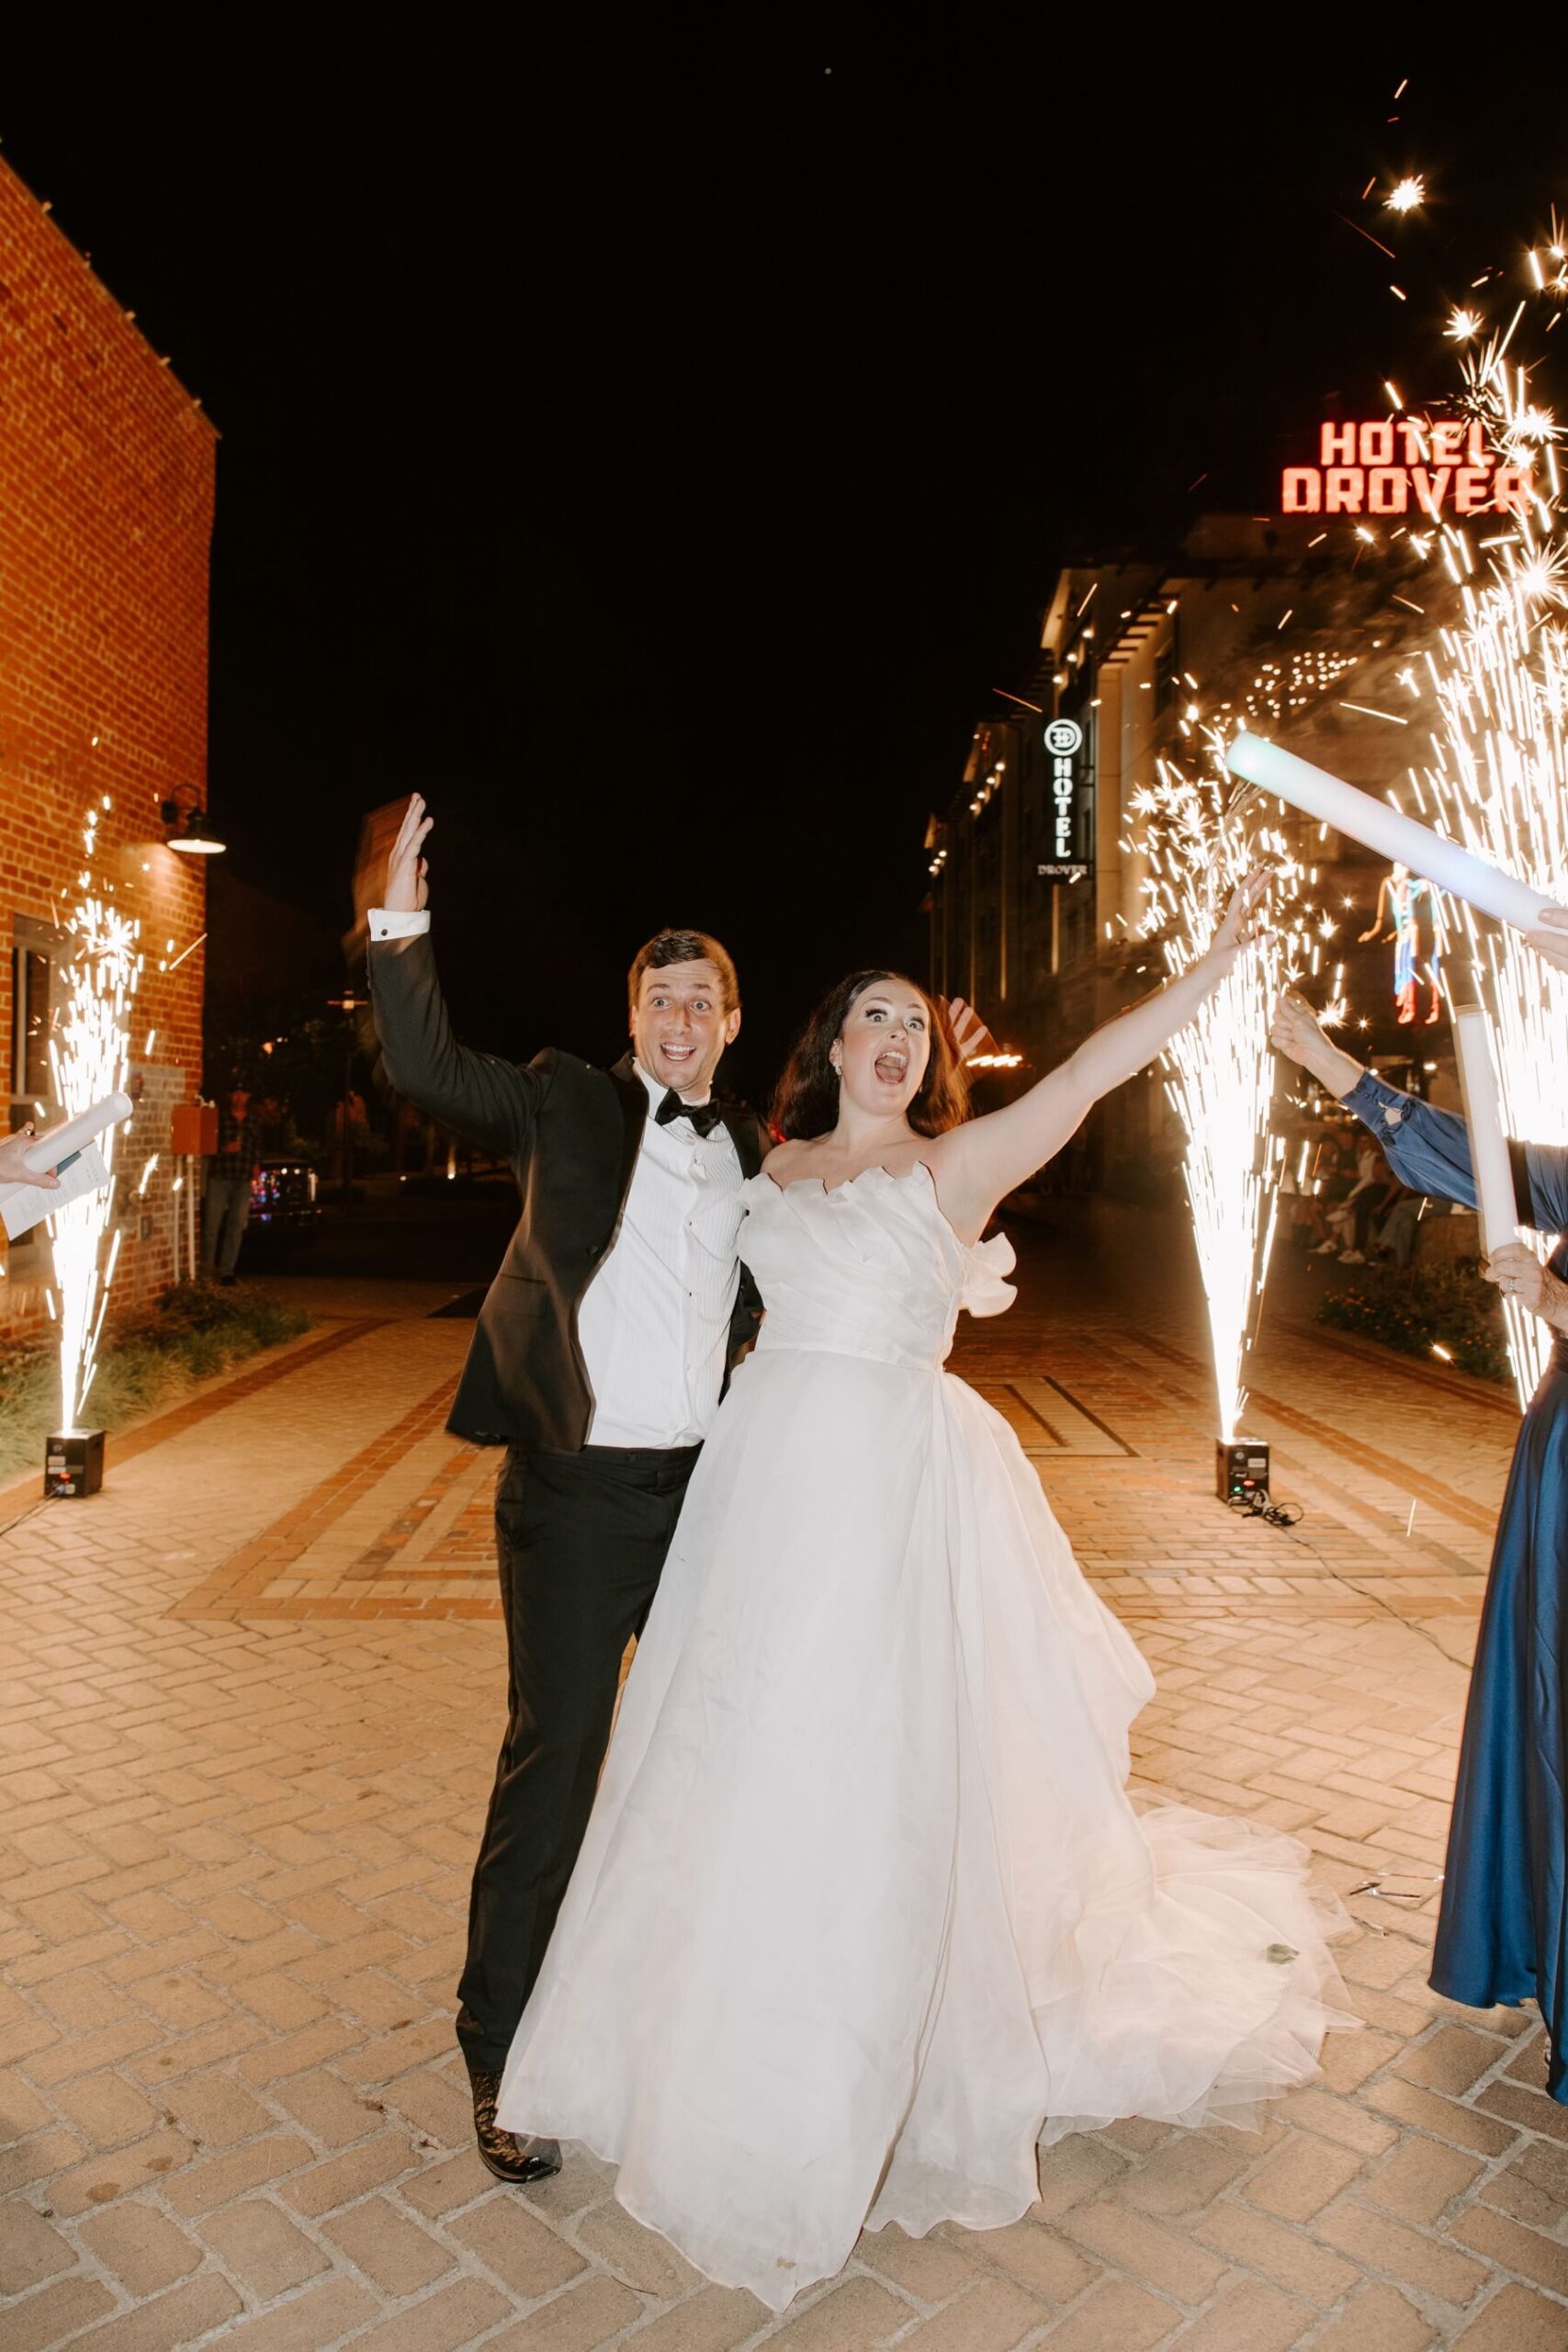 Bride and groom cheering during wedding reception exit at Hotel Drover